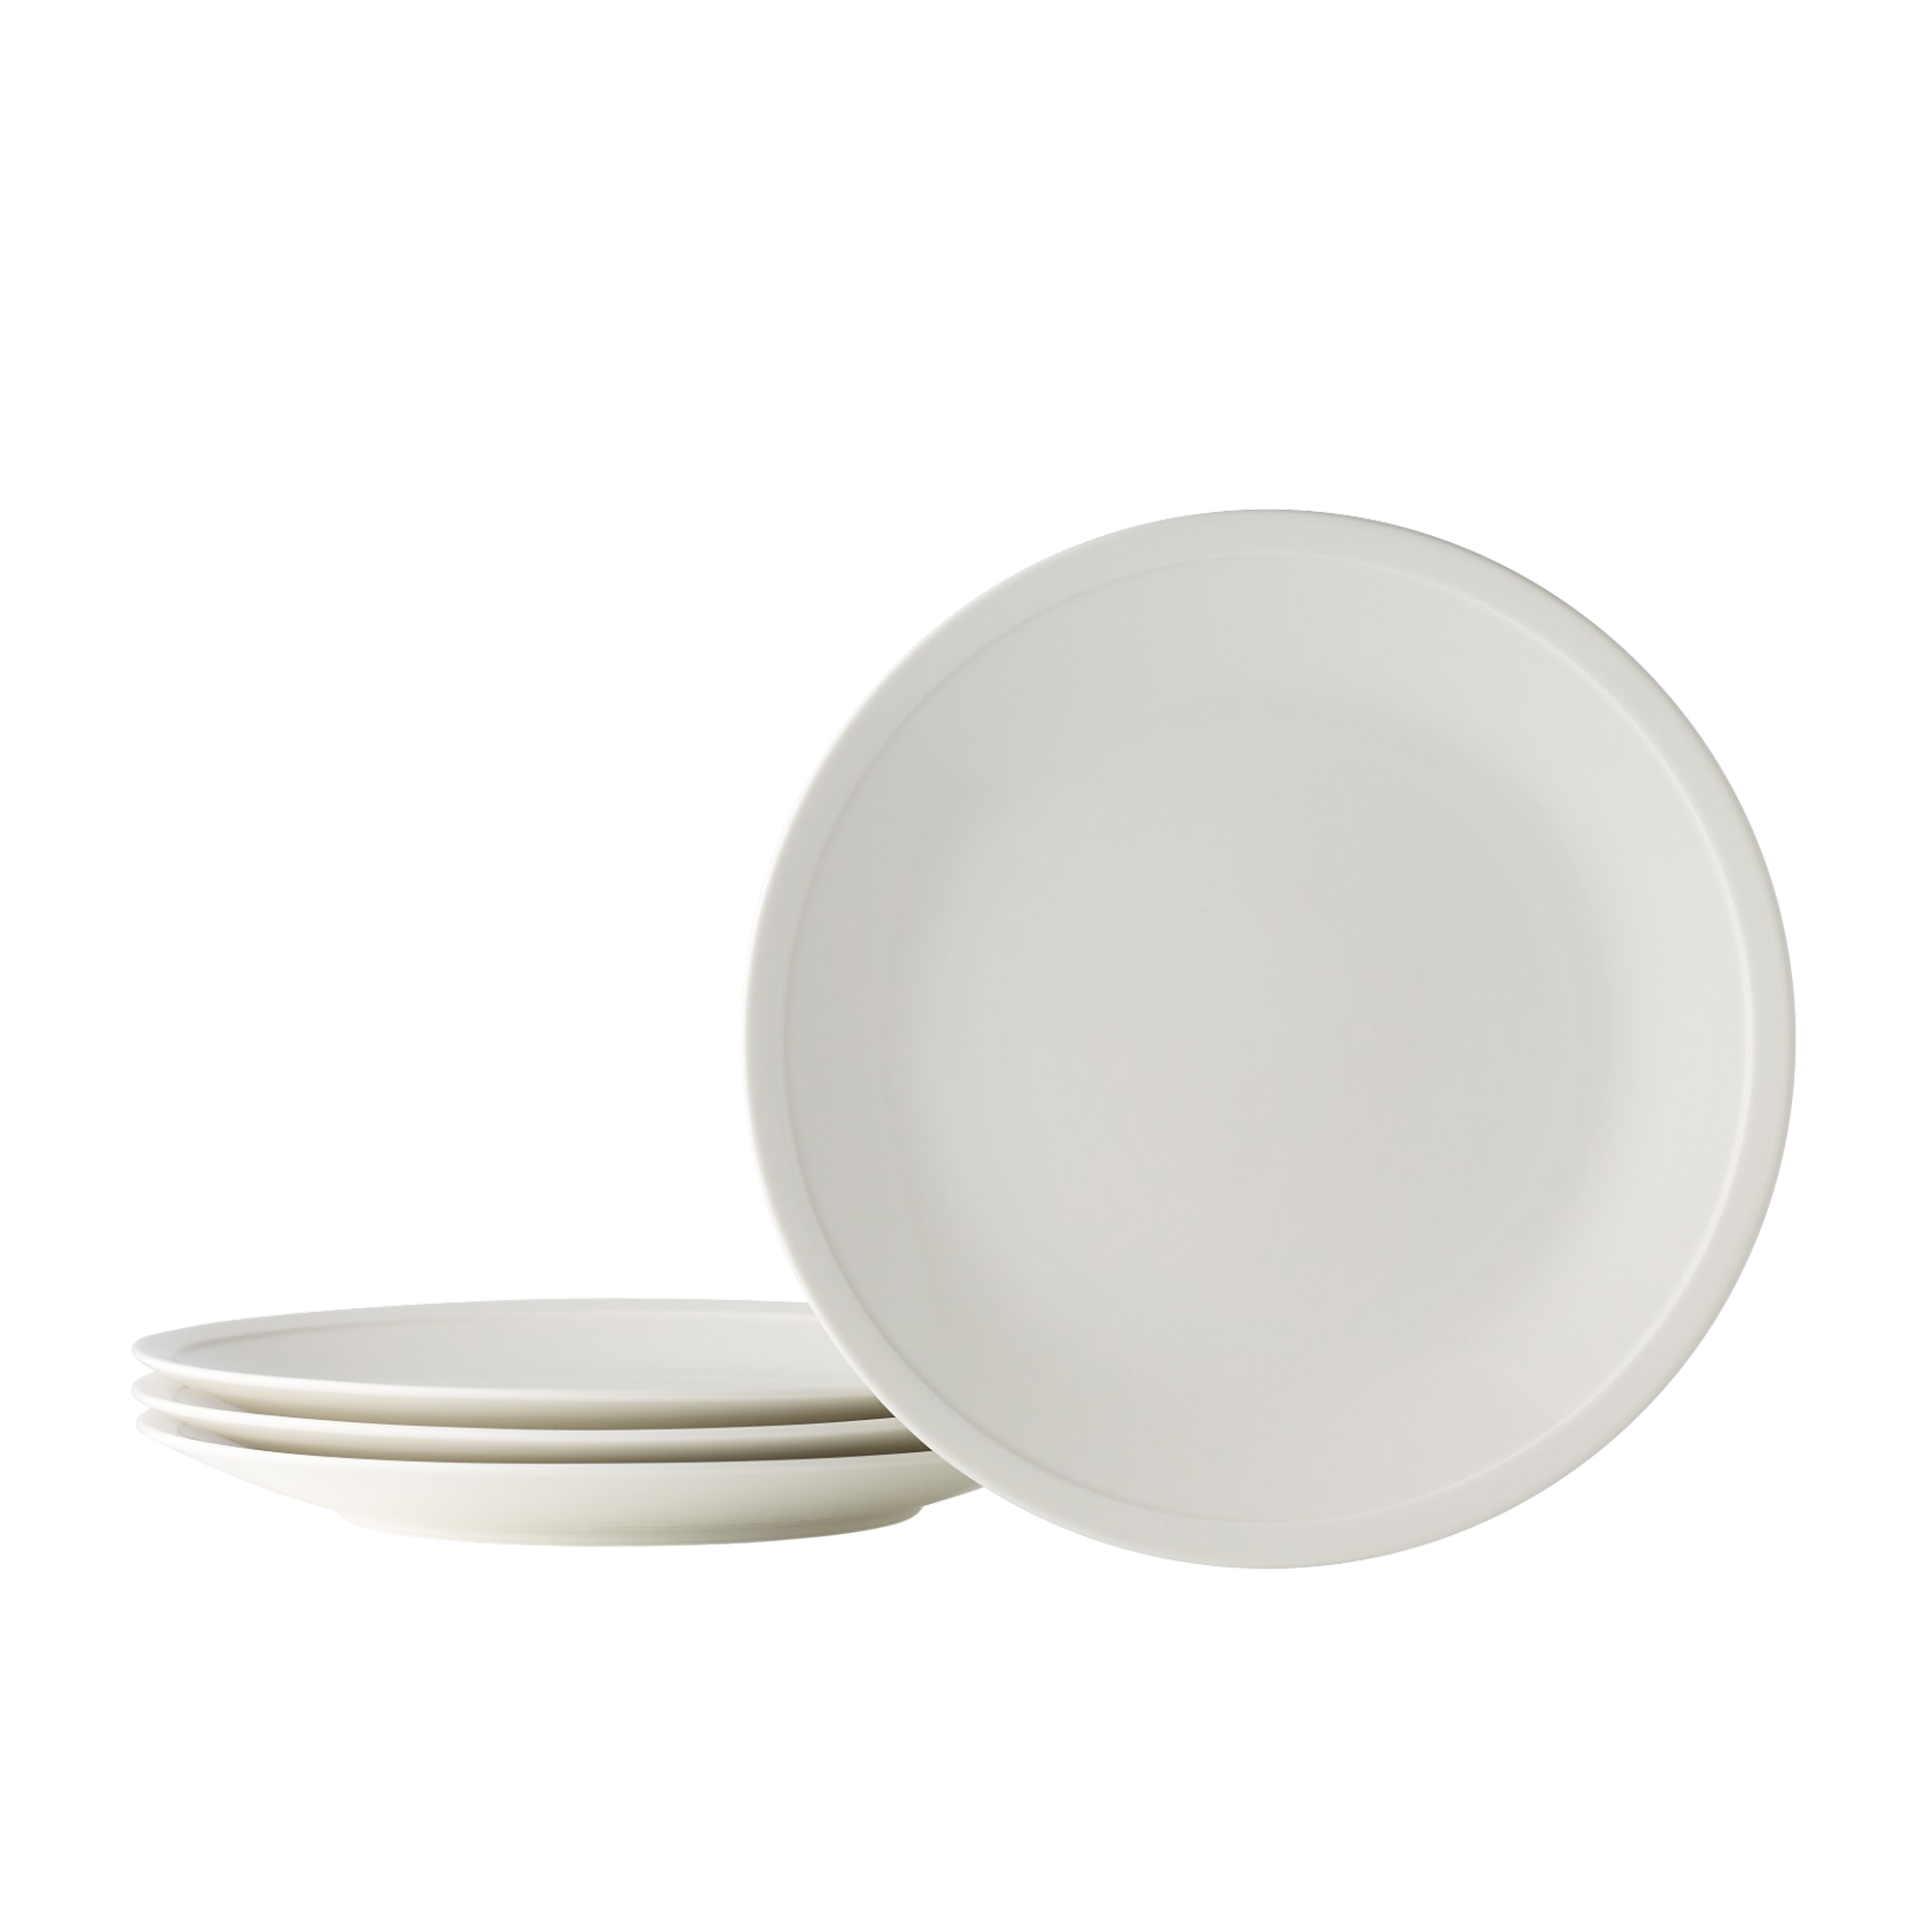 Noritake Everyday by Adam Liaw Dinner Plate Set of 4 White Image 1